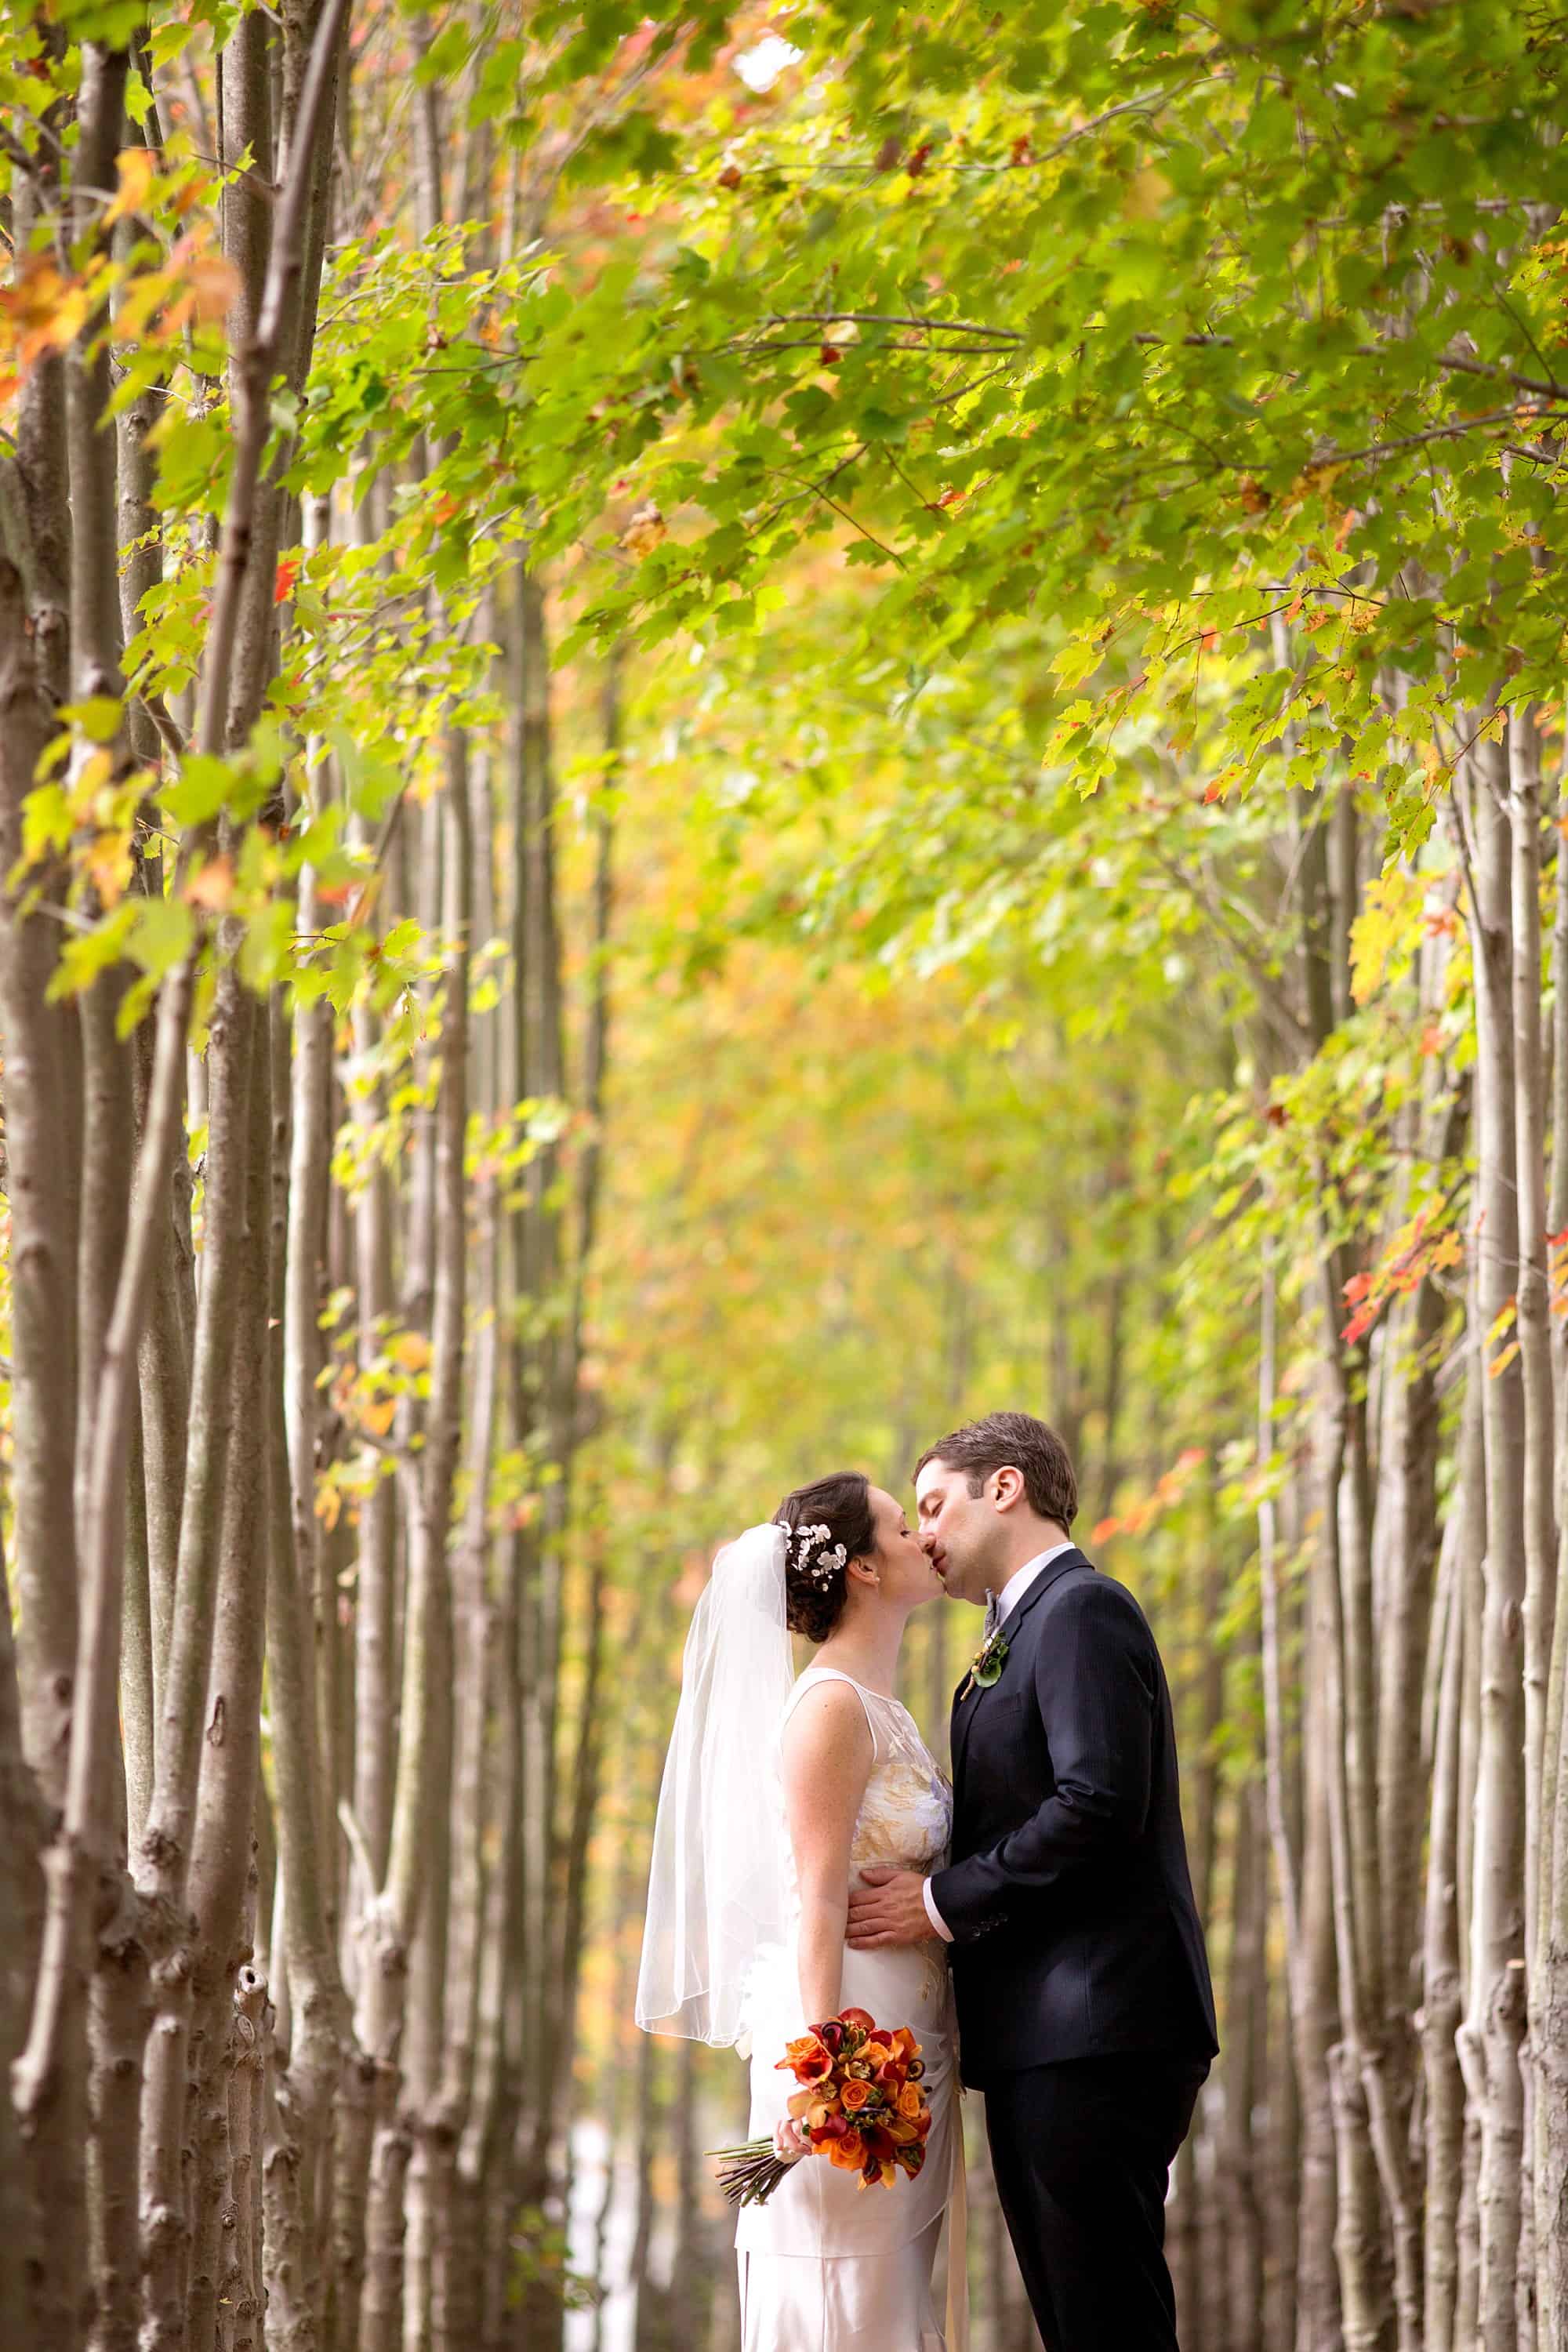 fall wedding Grounds For Sculpture outdoor portrait hamilton nj princeton bride and groom newlyweds kiss pass tree